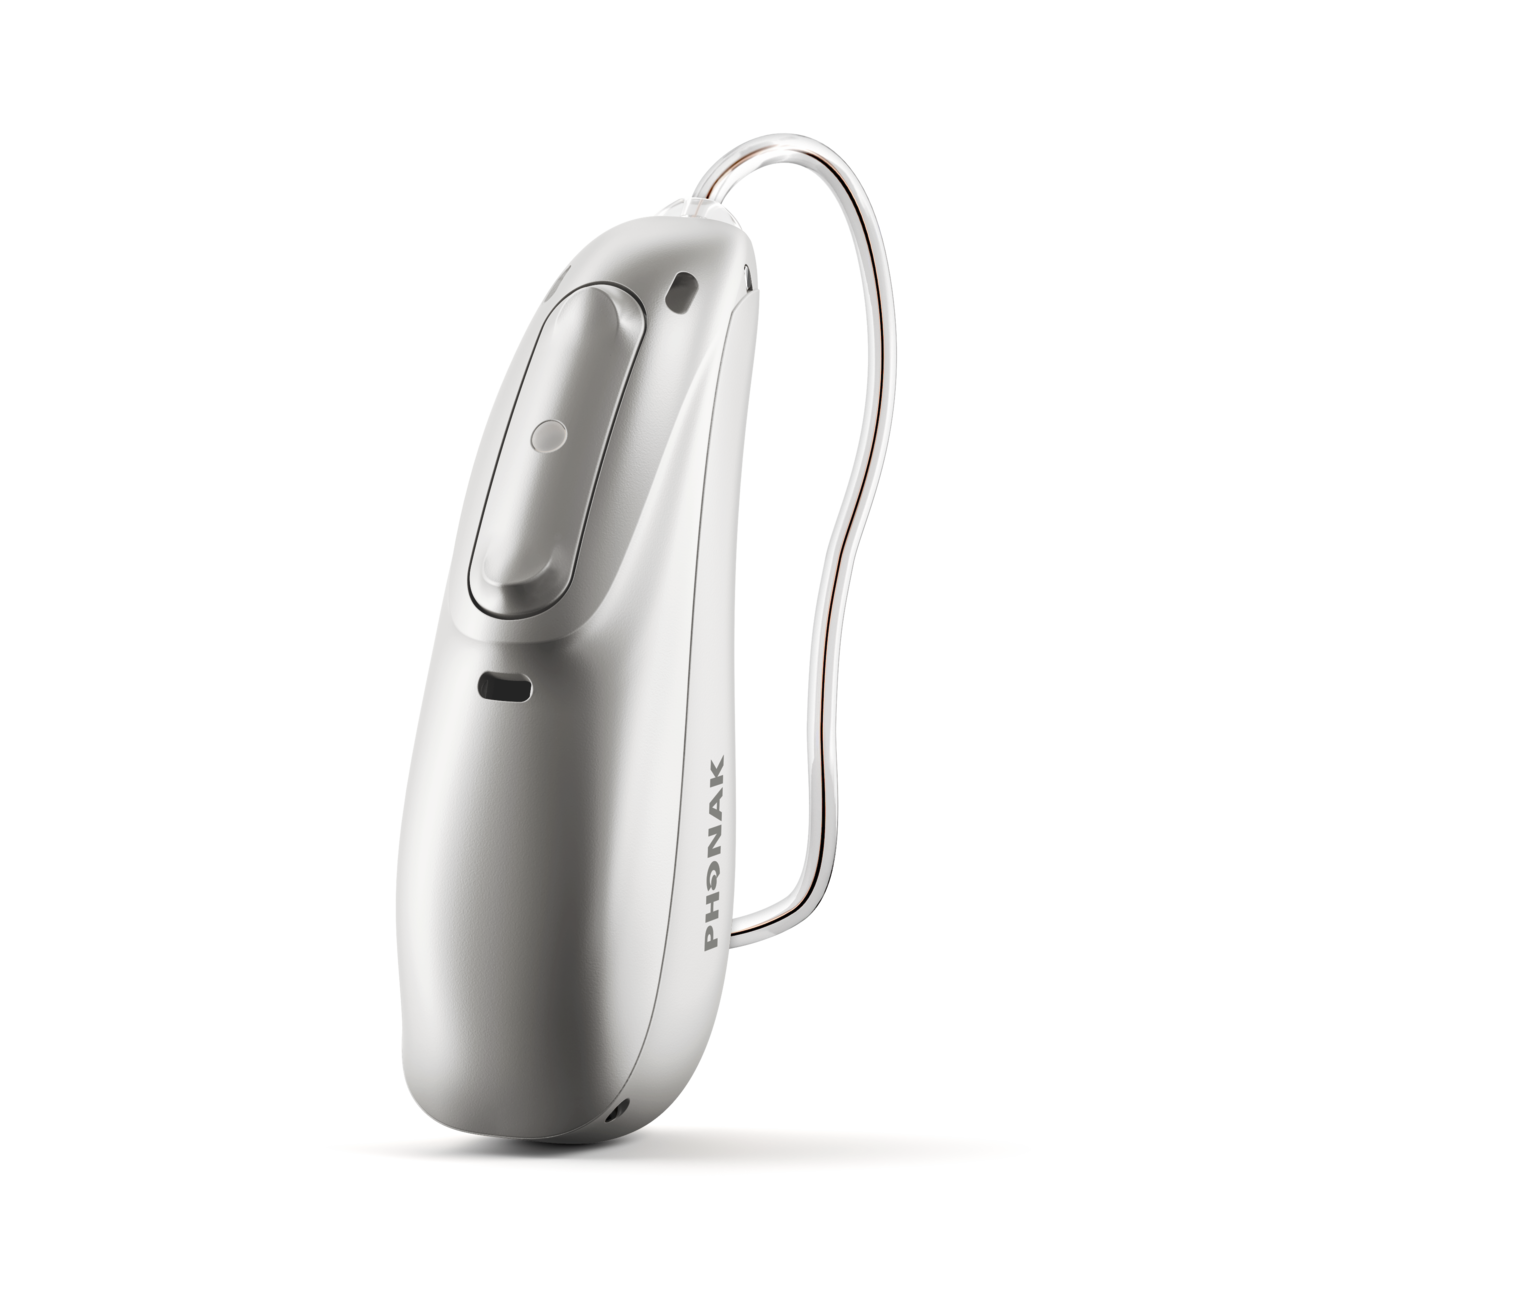 Phonak Audéo Lumity L-P Receiver-in-Canal hearing aid.